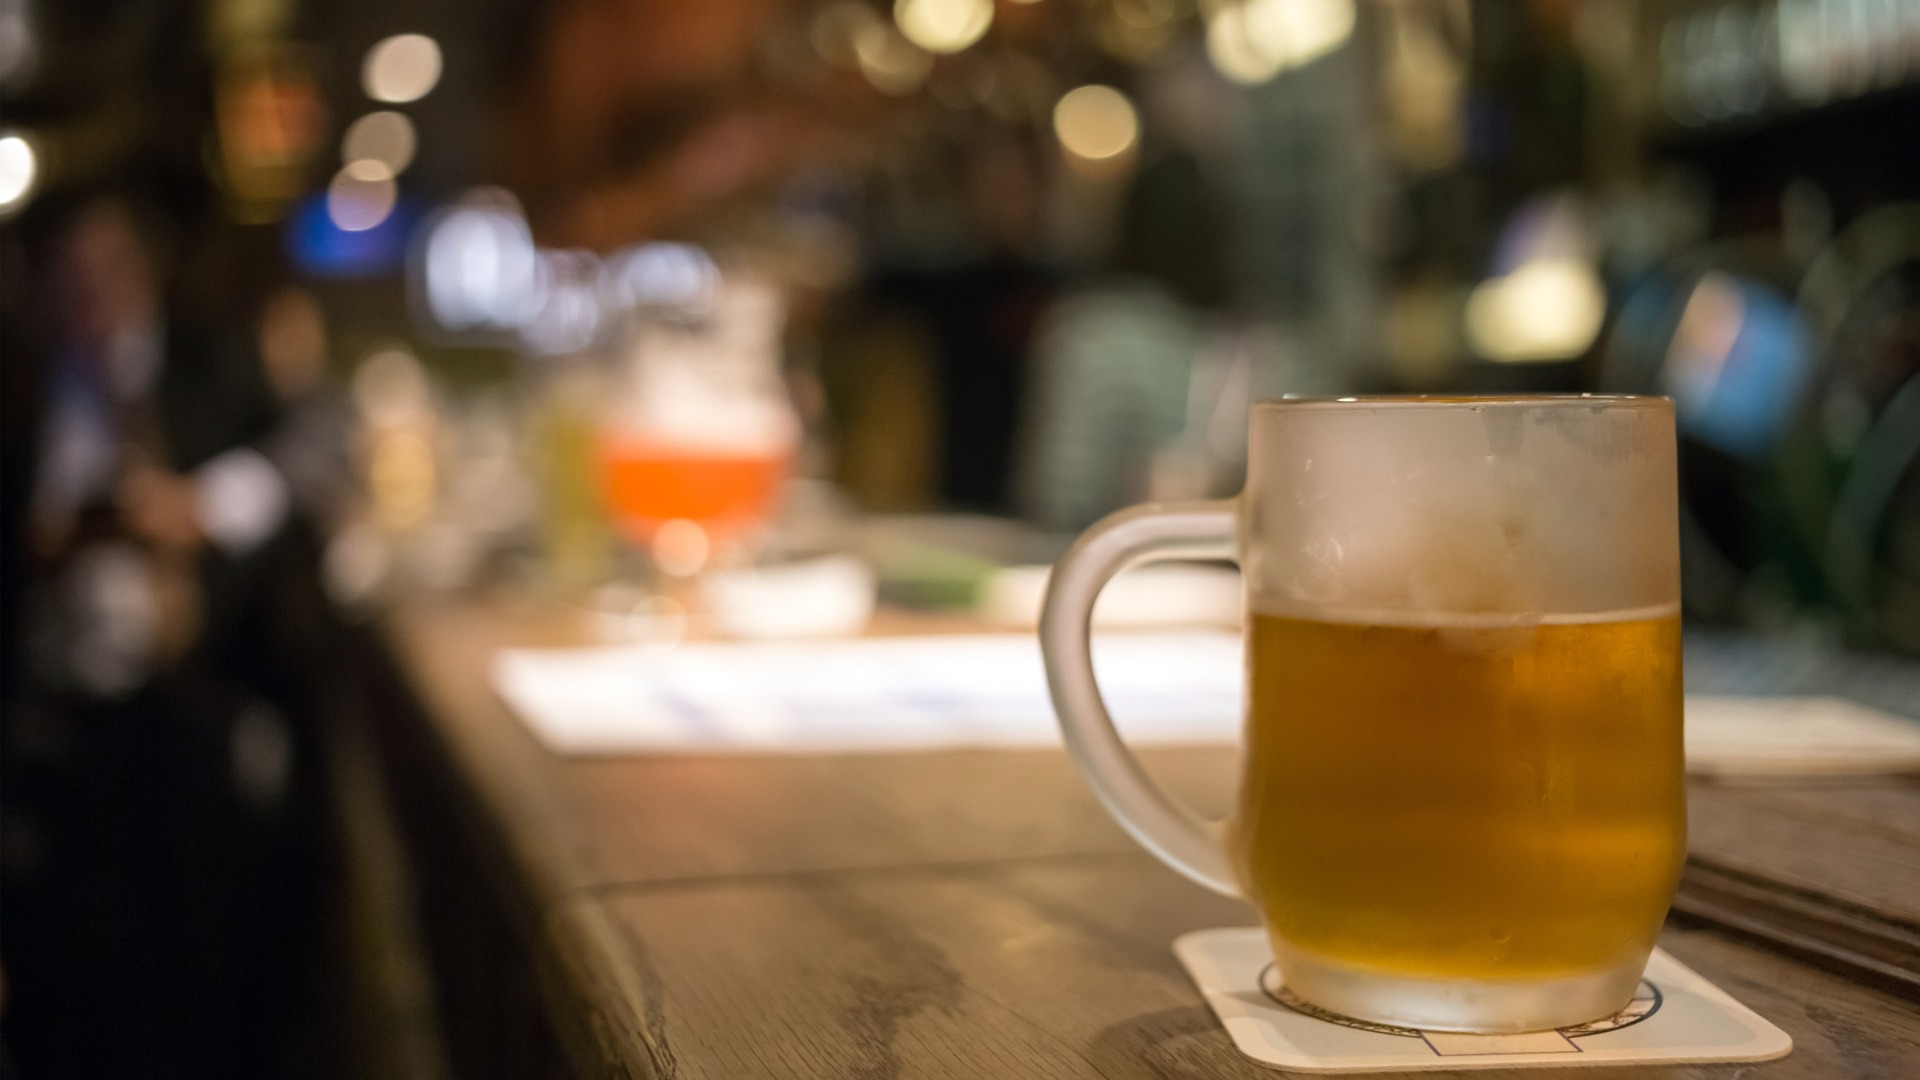 This image shows a frosty glass of beer on a bar counter with a blurry background. 